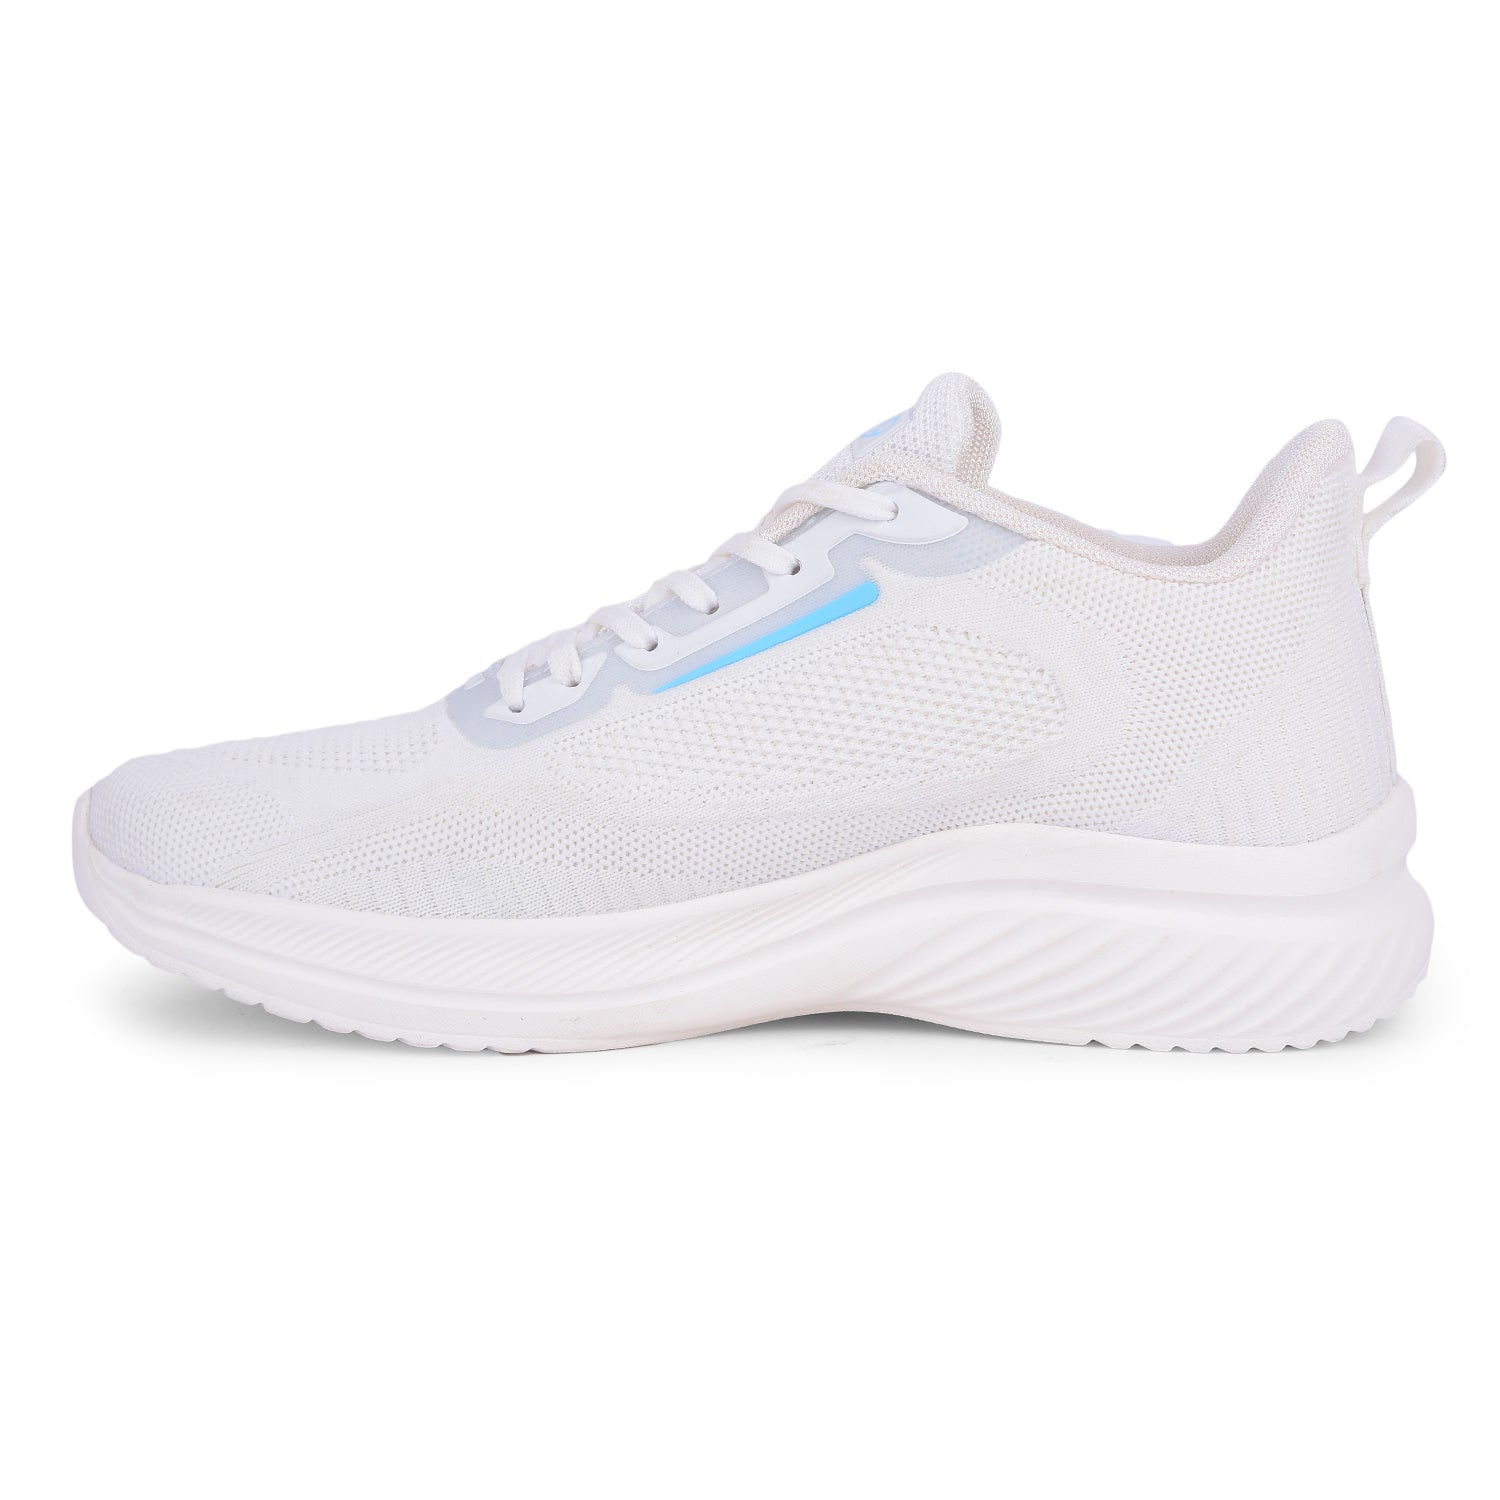 Calcetto CLT-2046 White Blue Sports Shoes For Men